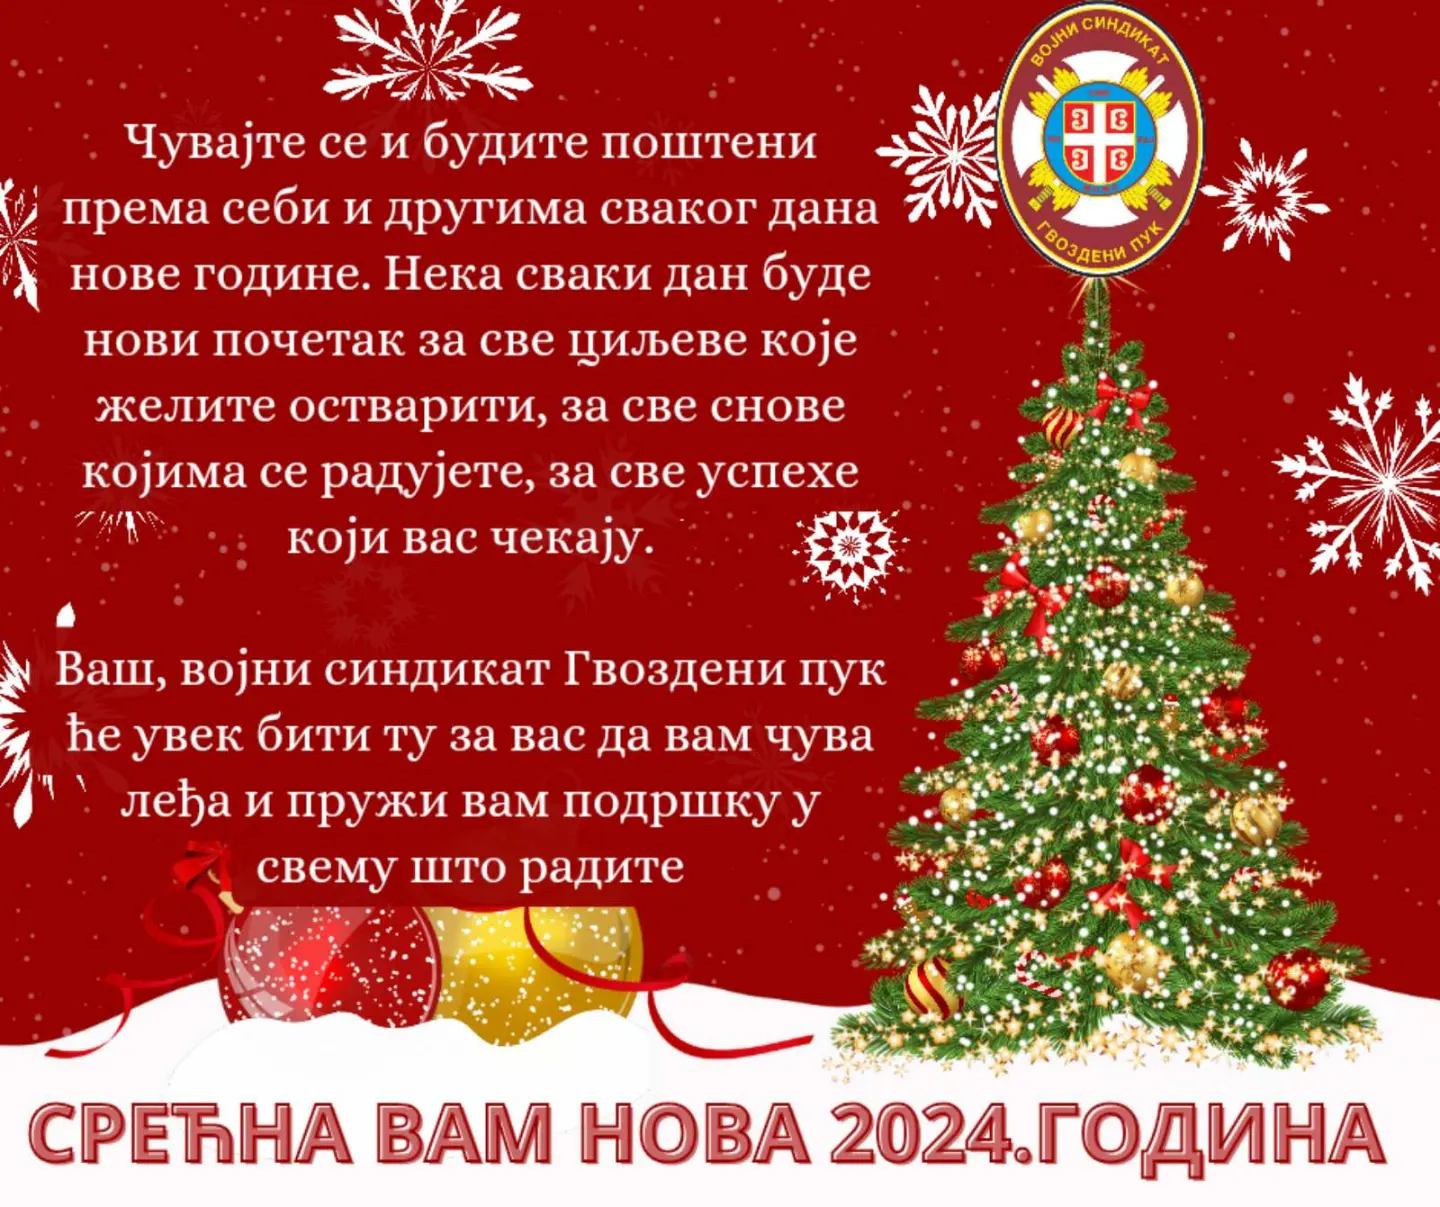 You are currently viewing СРЕЋНА ВАМ НОВА 2024. ГОДИНА